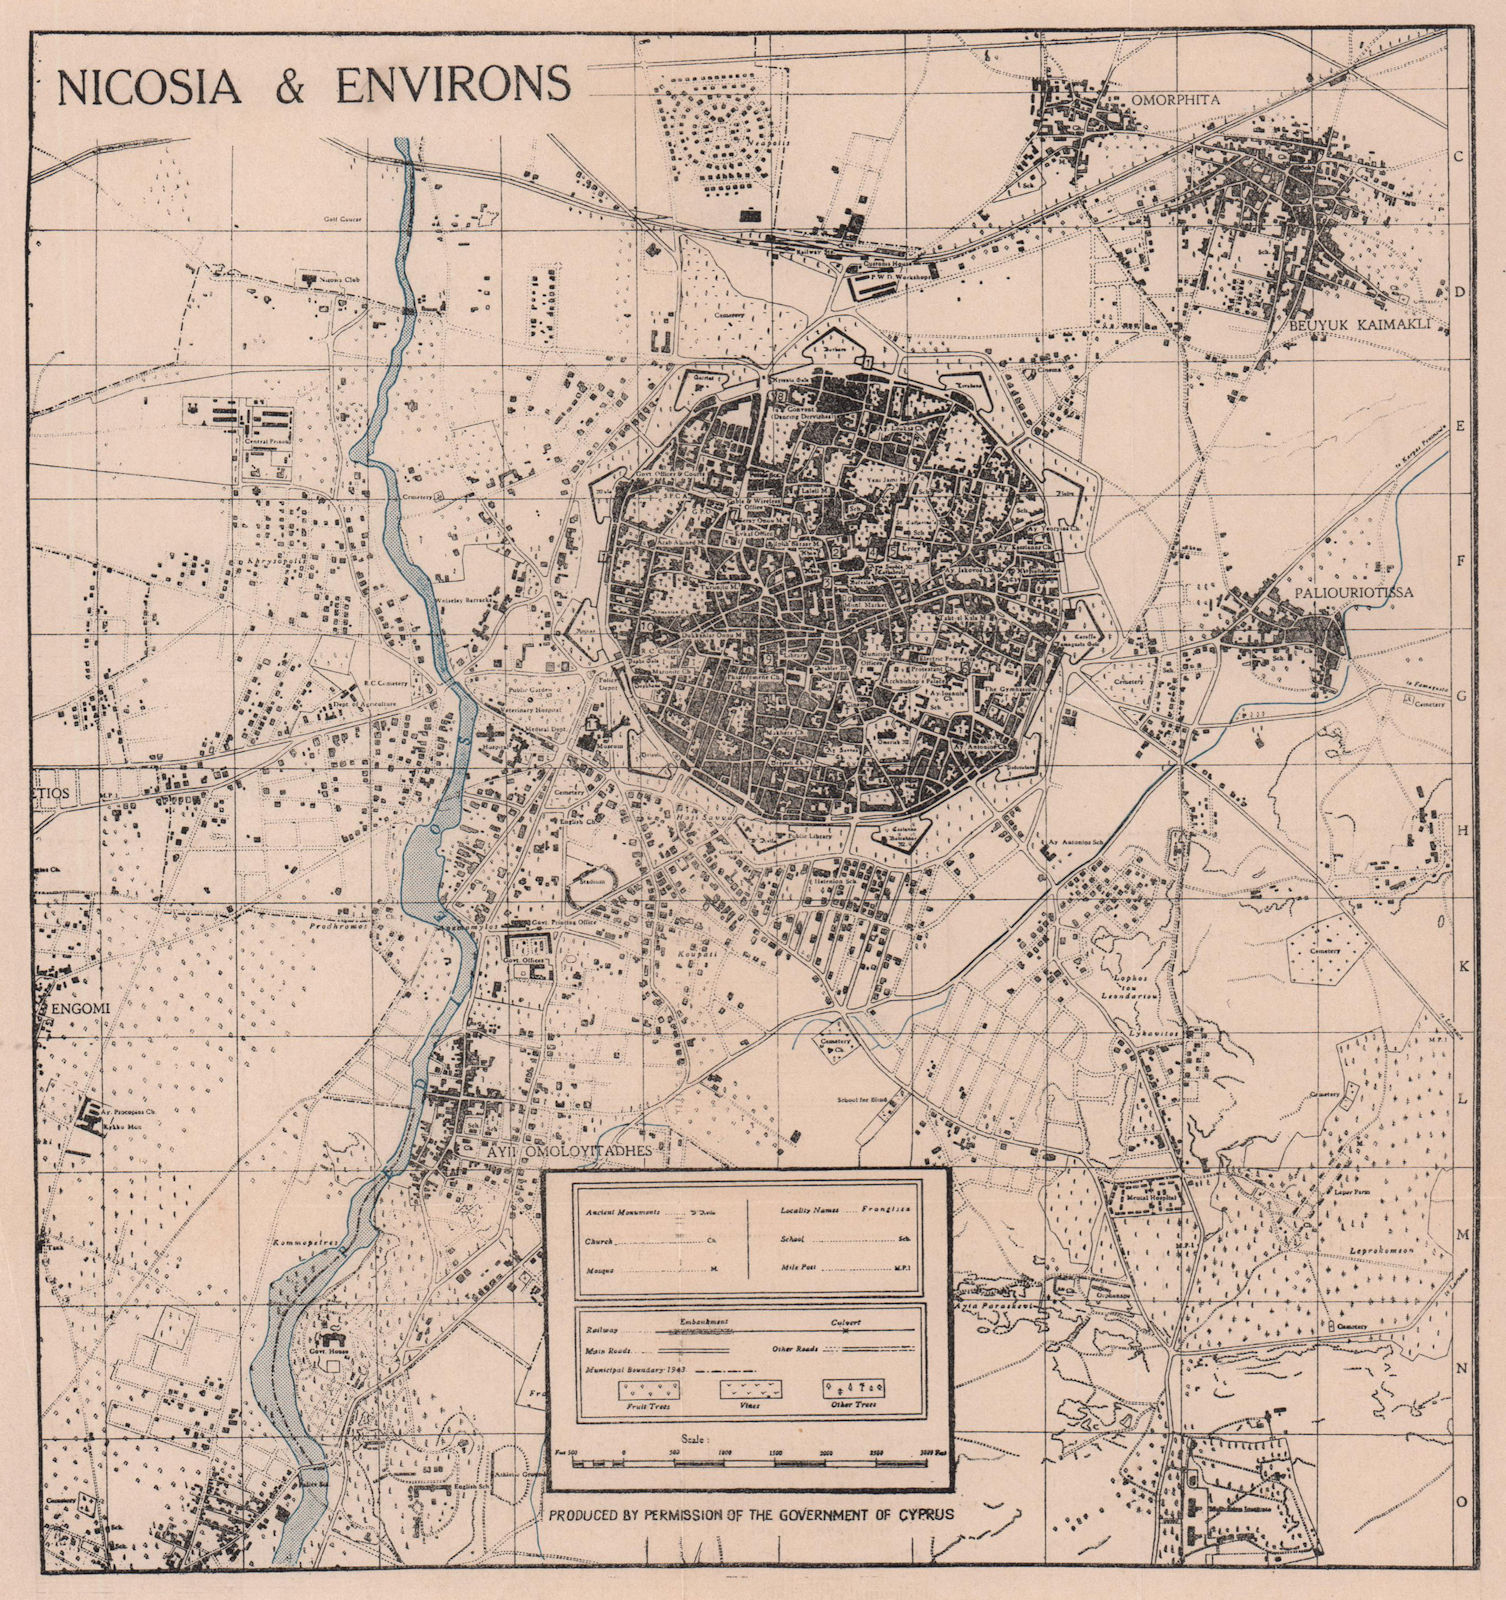 Nicosia & environs vintage town / city plan. Cyprus 1946 old vintage map chart